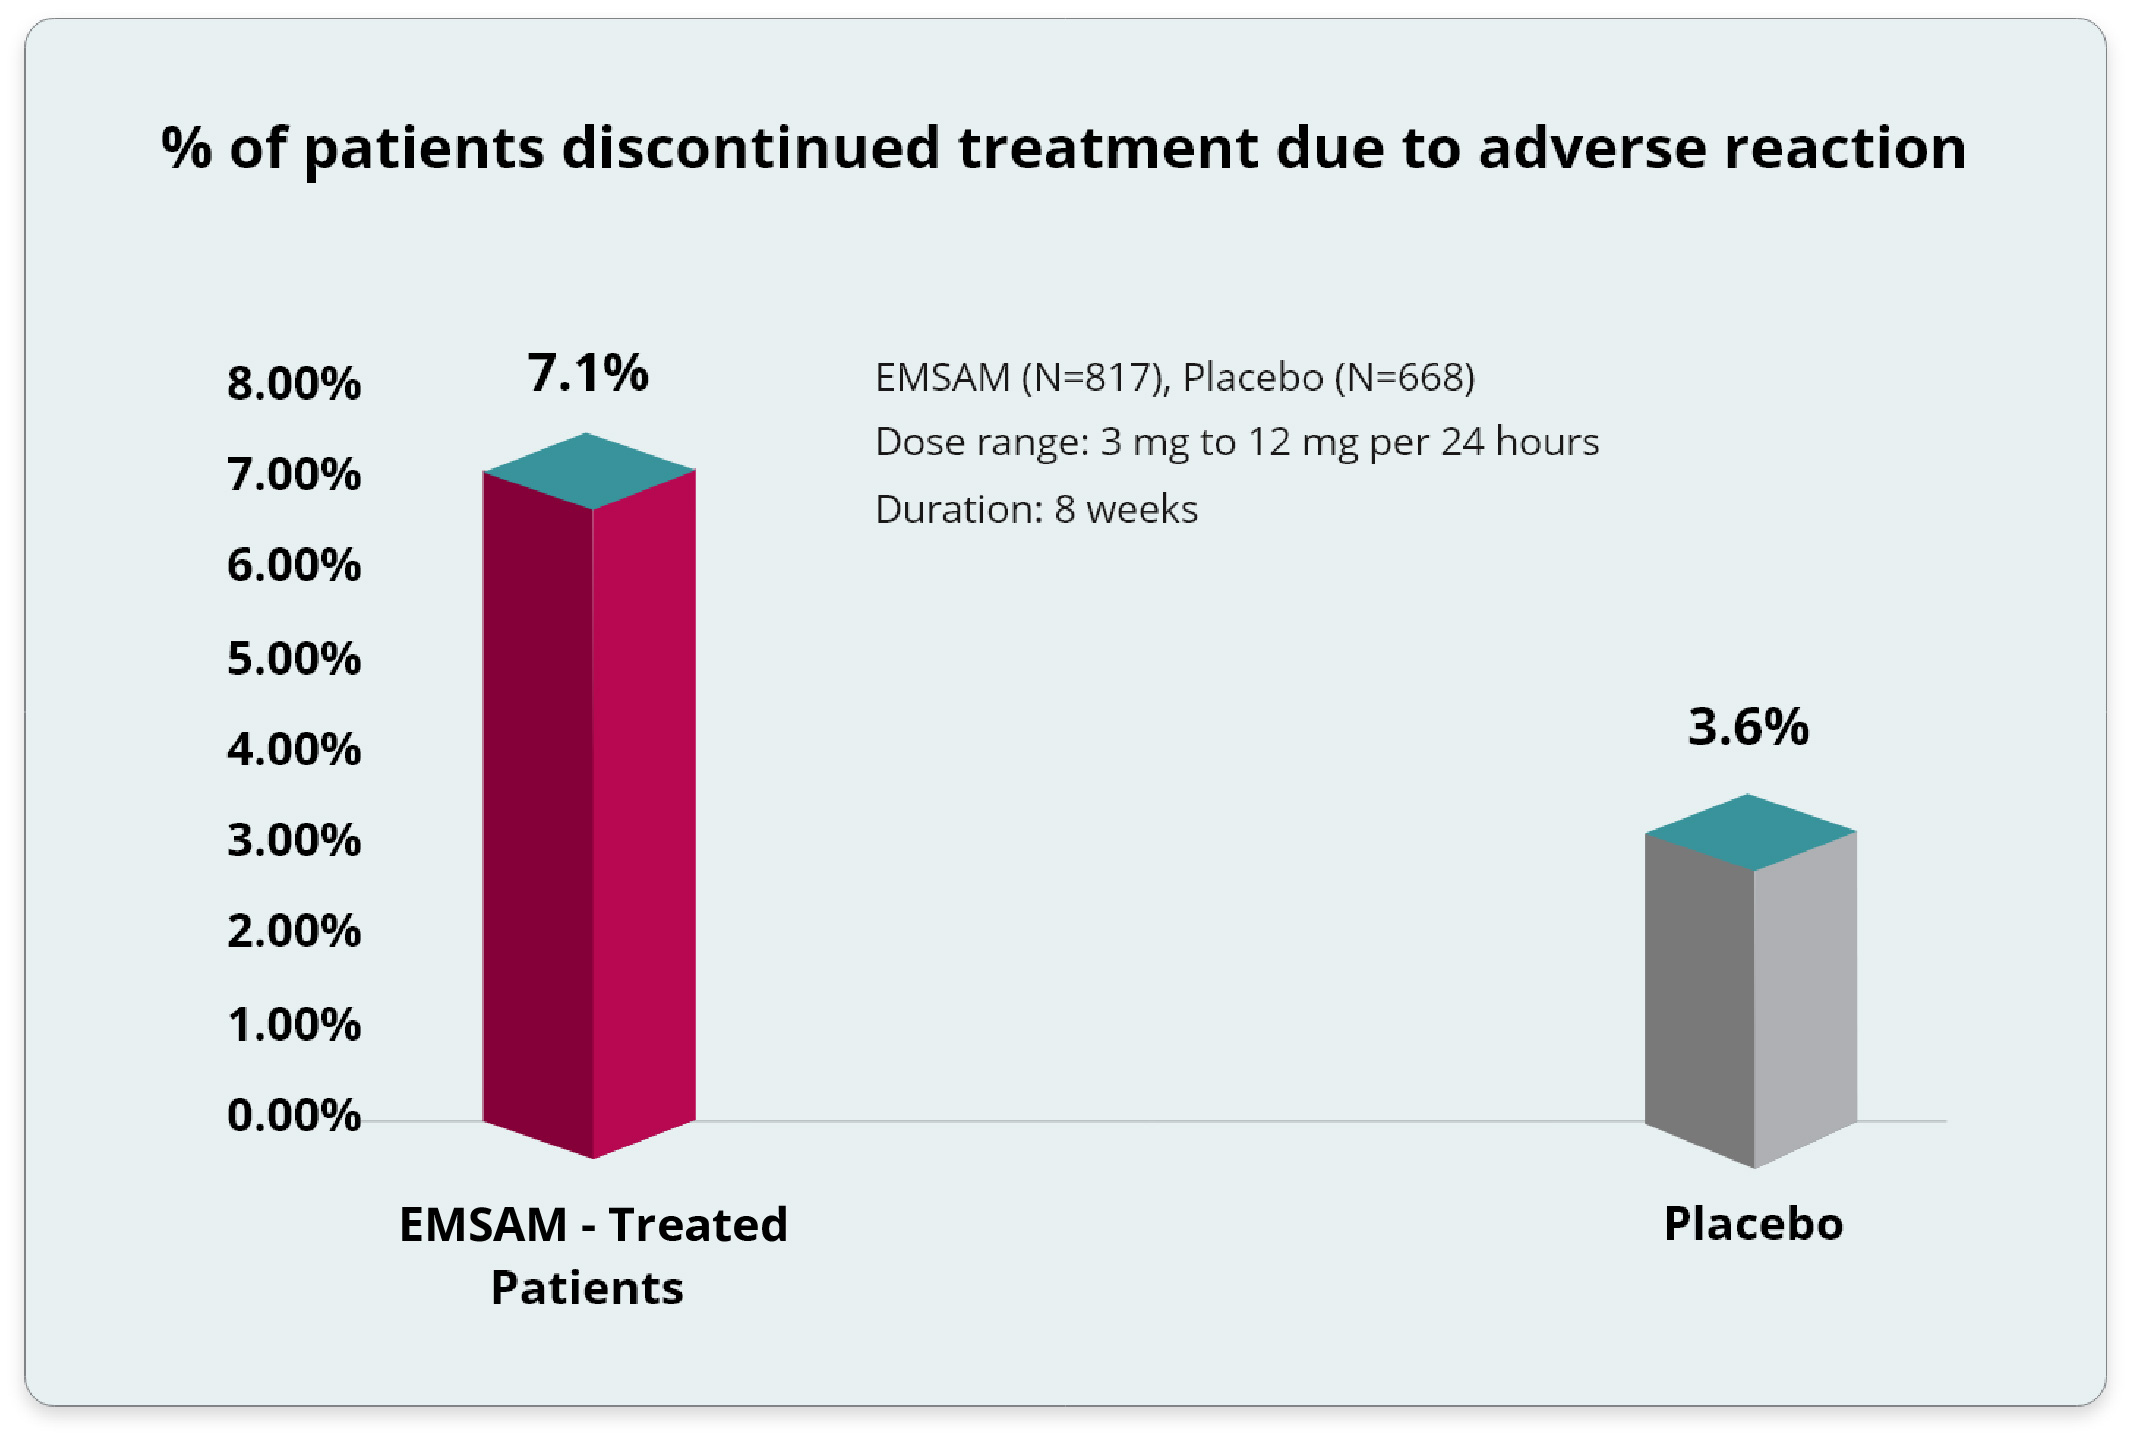 Percentage of patients discontinued due to adverse reactions. Read more below